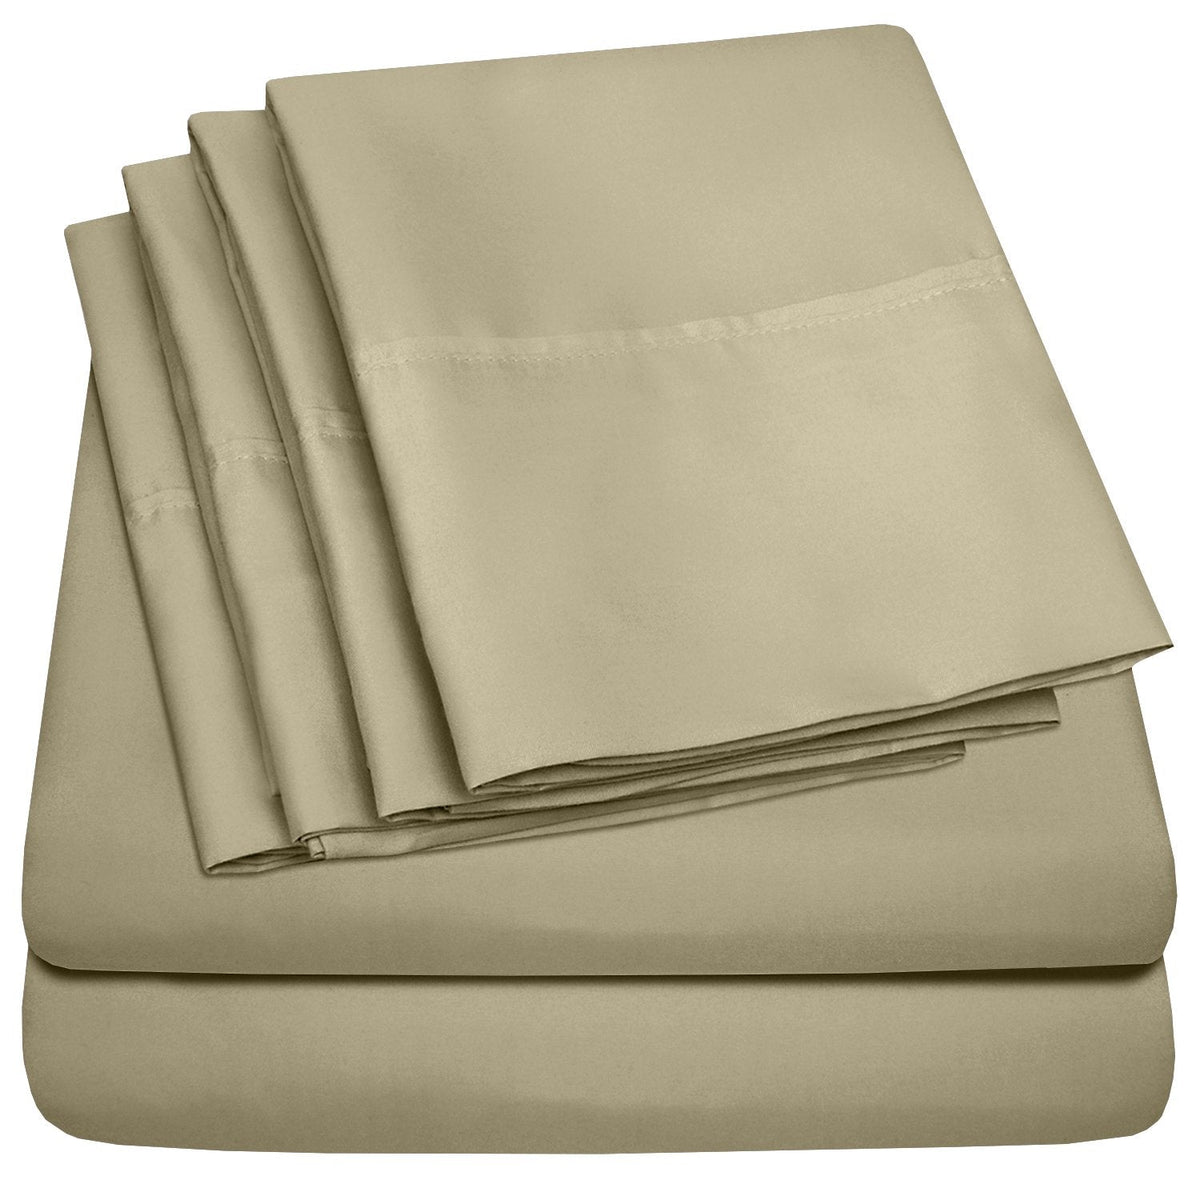 Deluxe 6-Piece Bed Sheet Set (Sage) - Folded